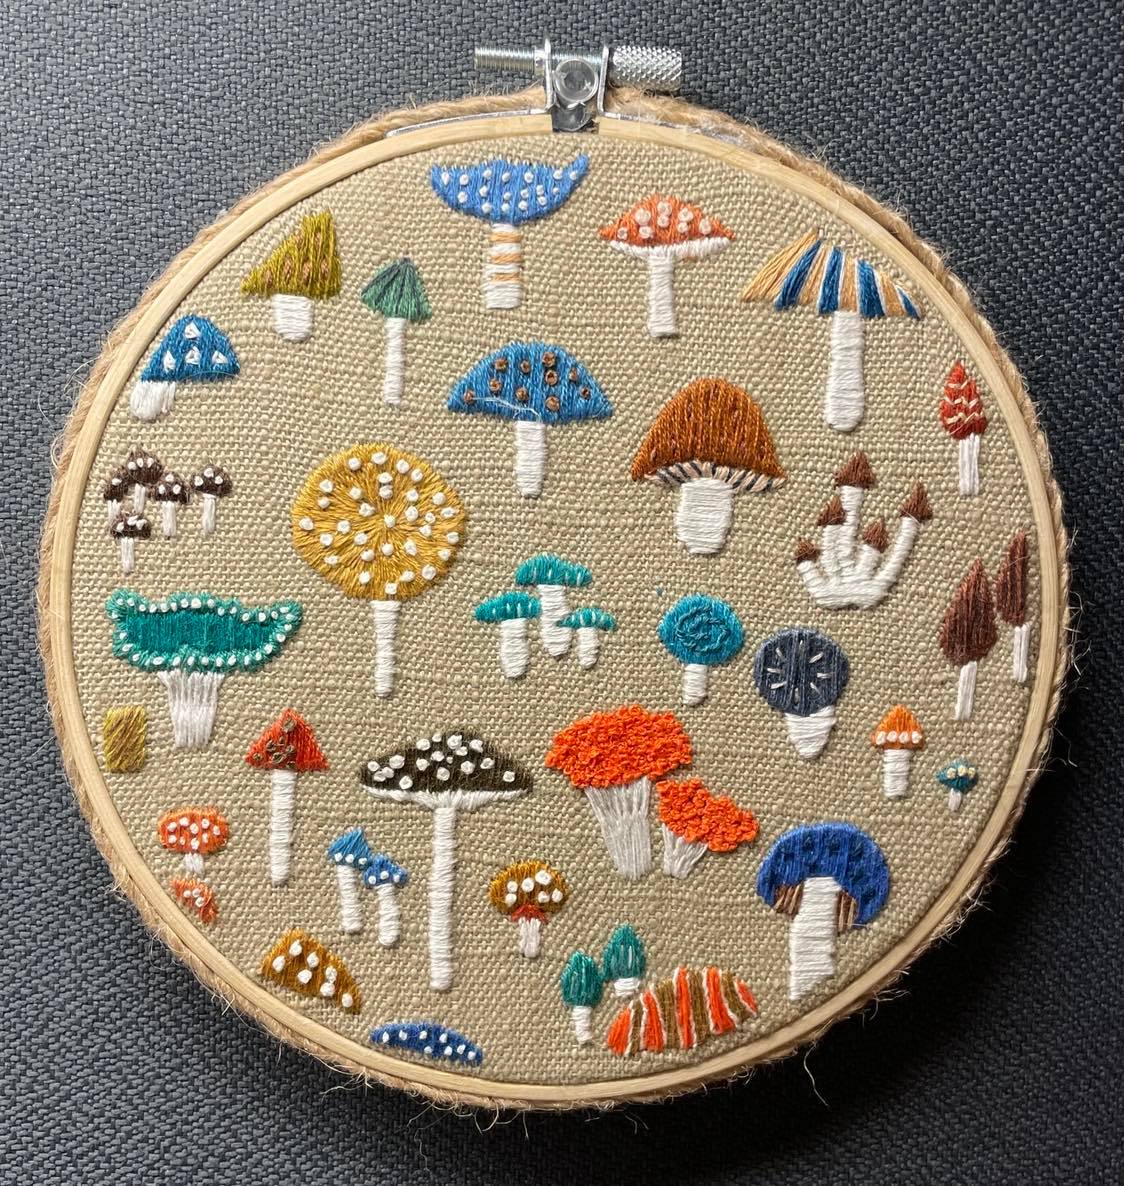 Mushroom Medley Finished Embroidery Piece